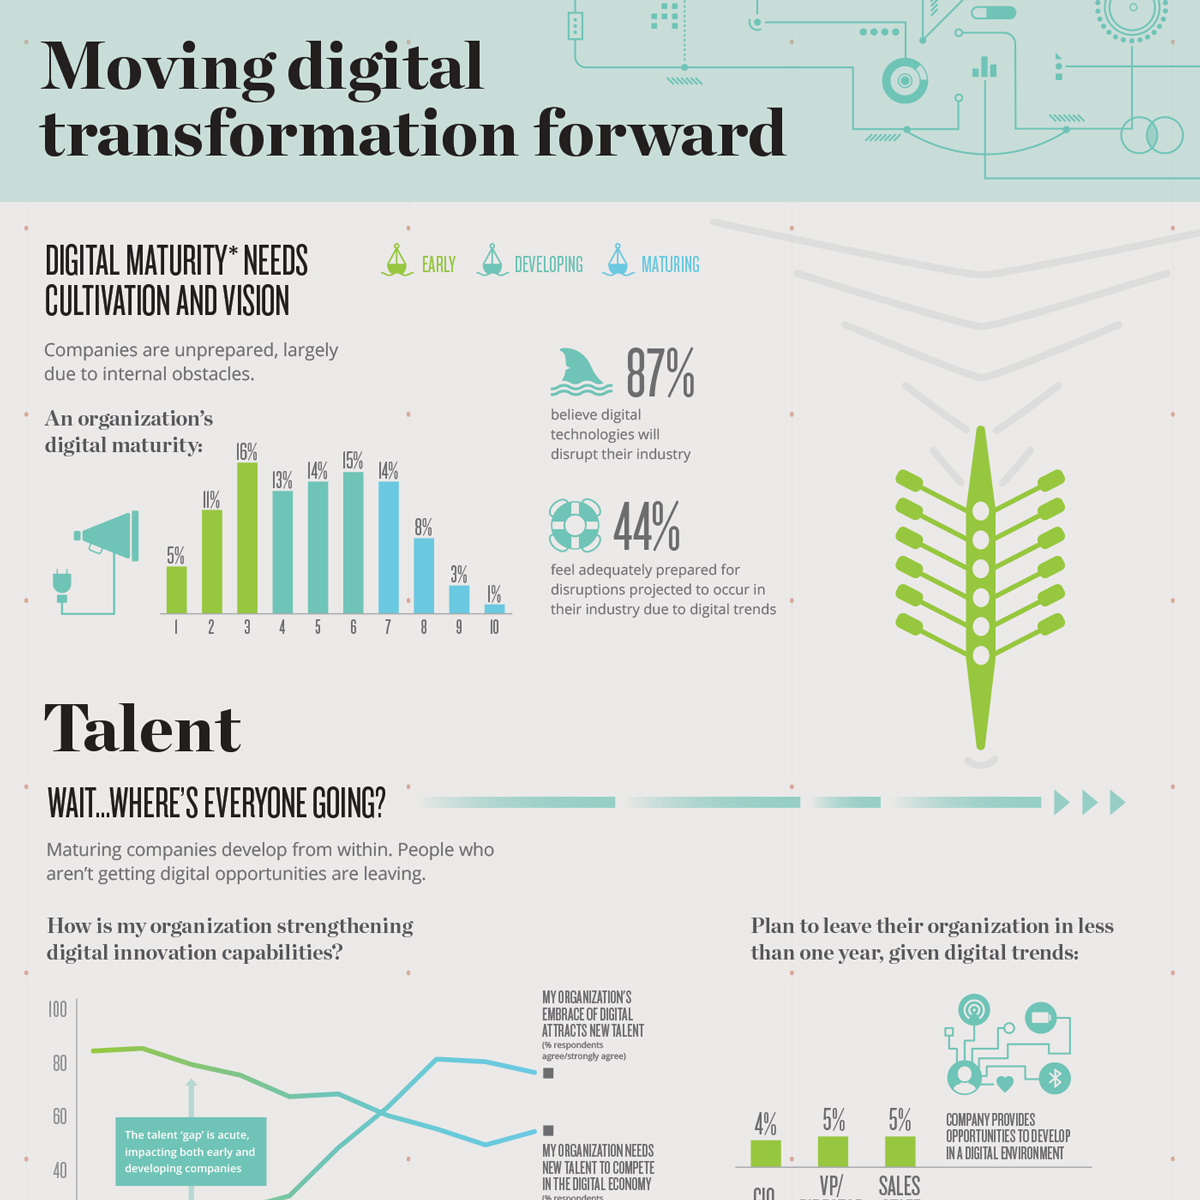 Aligning The Organization For Its Digital Future